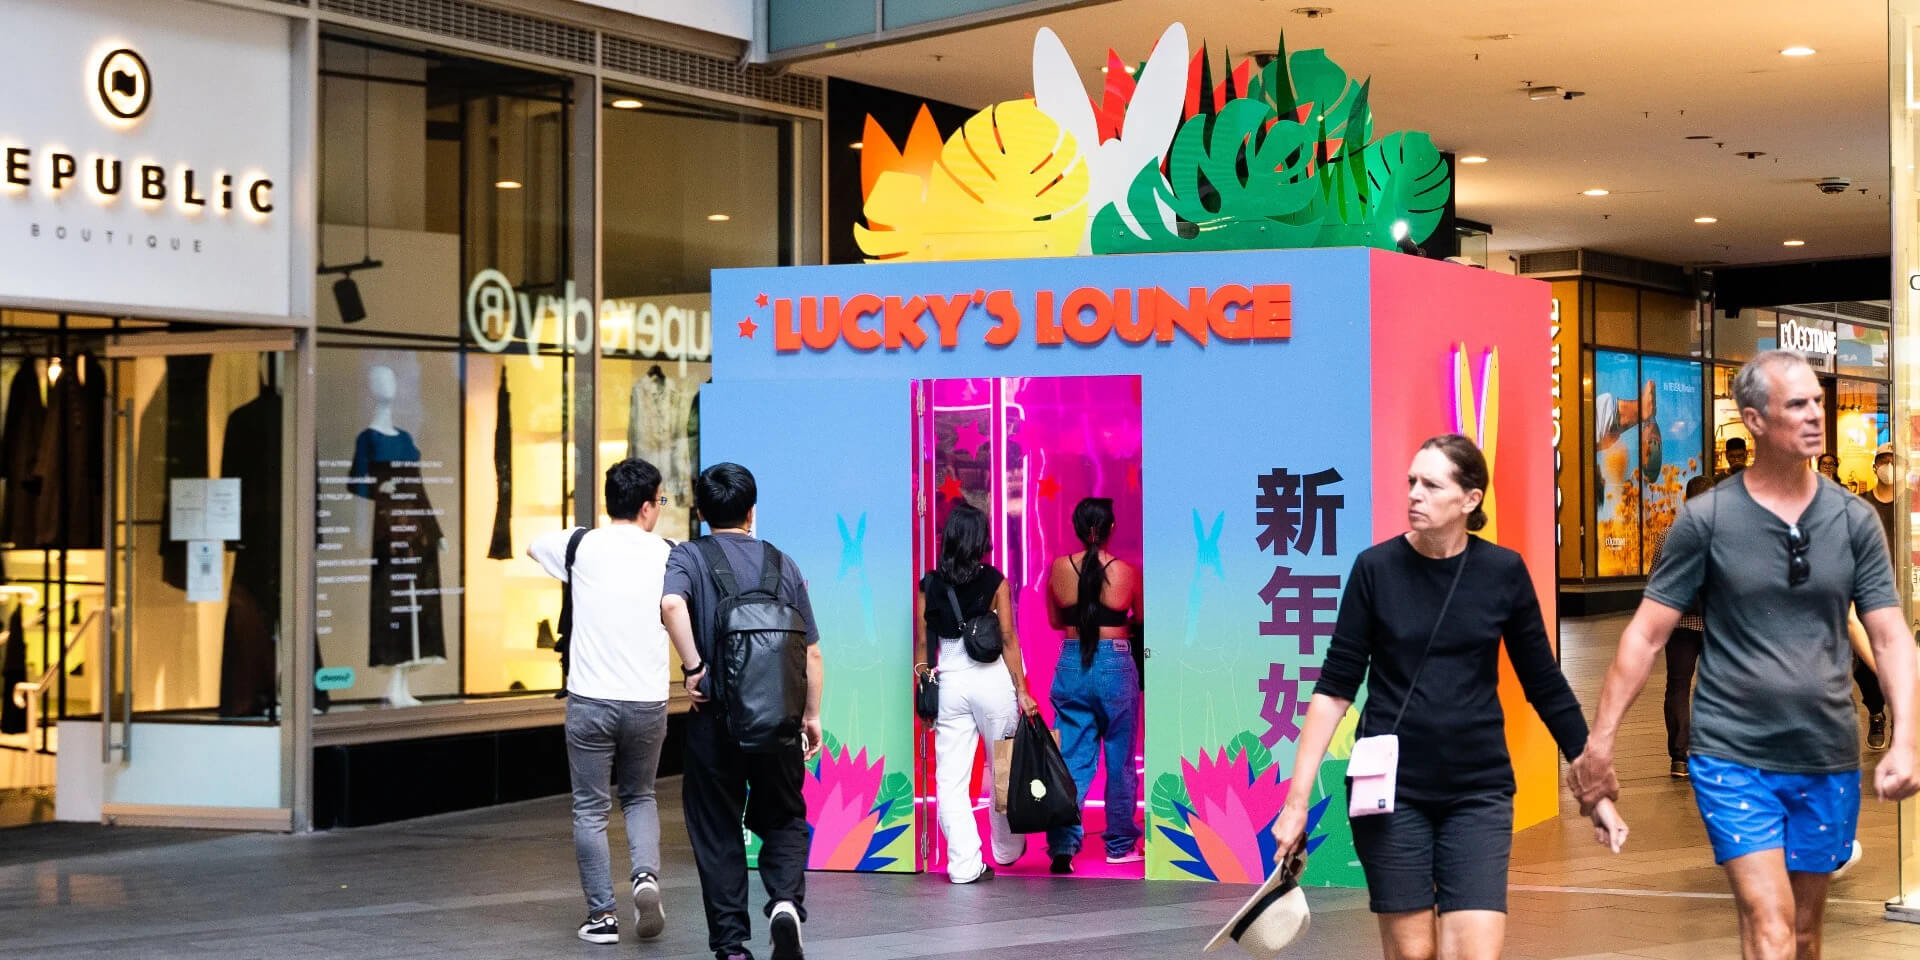 People enjoying the Lucky Lunar experiential brand activation installation at World Square Sydney for Lunar New Year